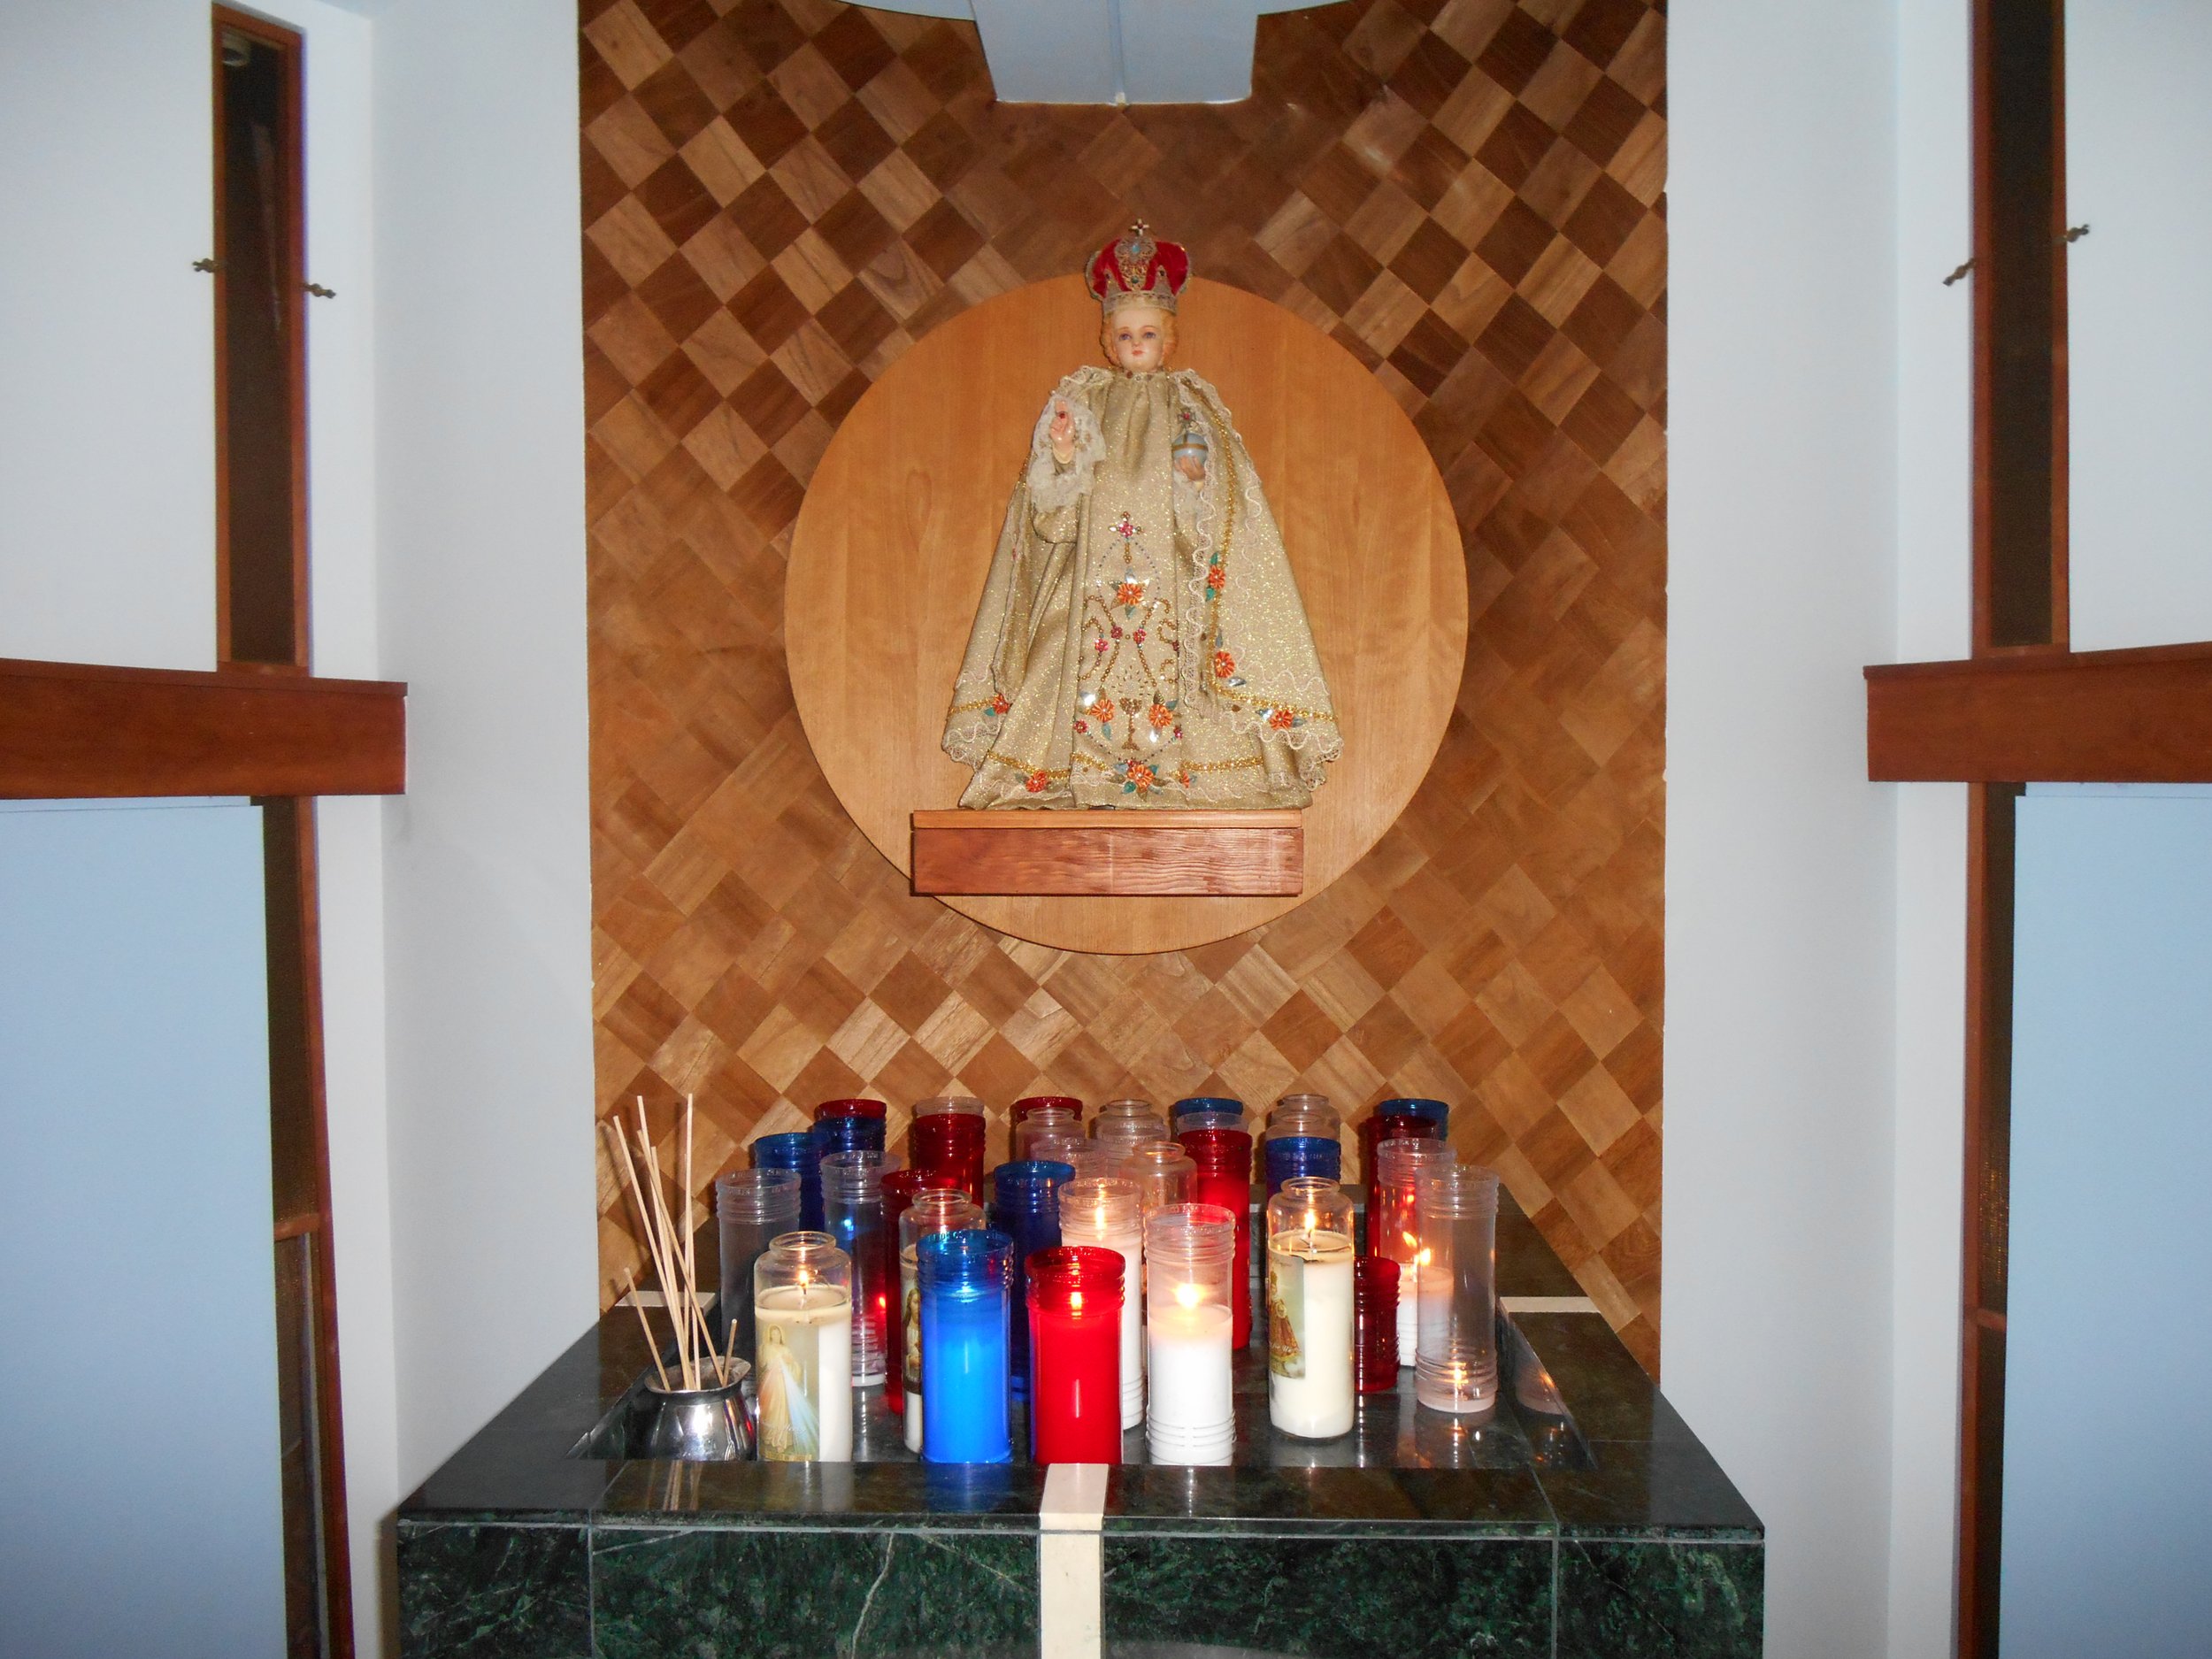 In our Church--The Infant of Prague